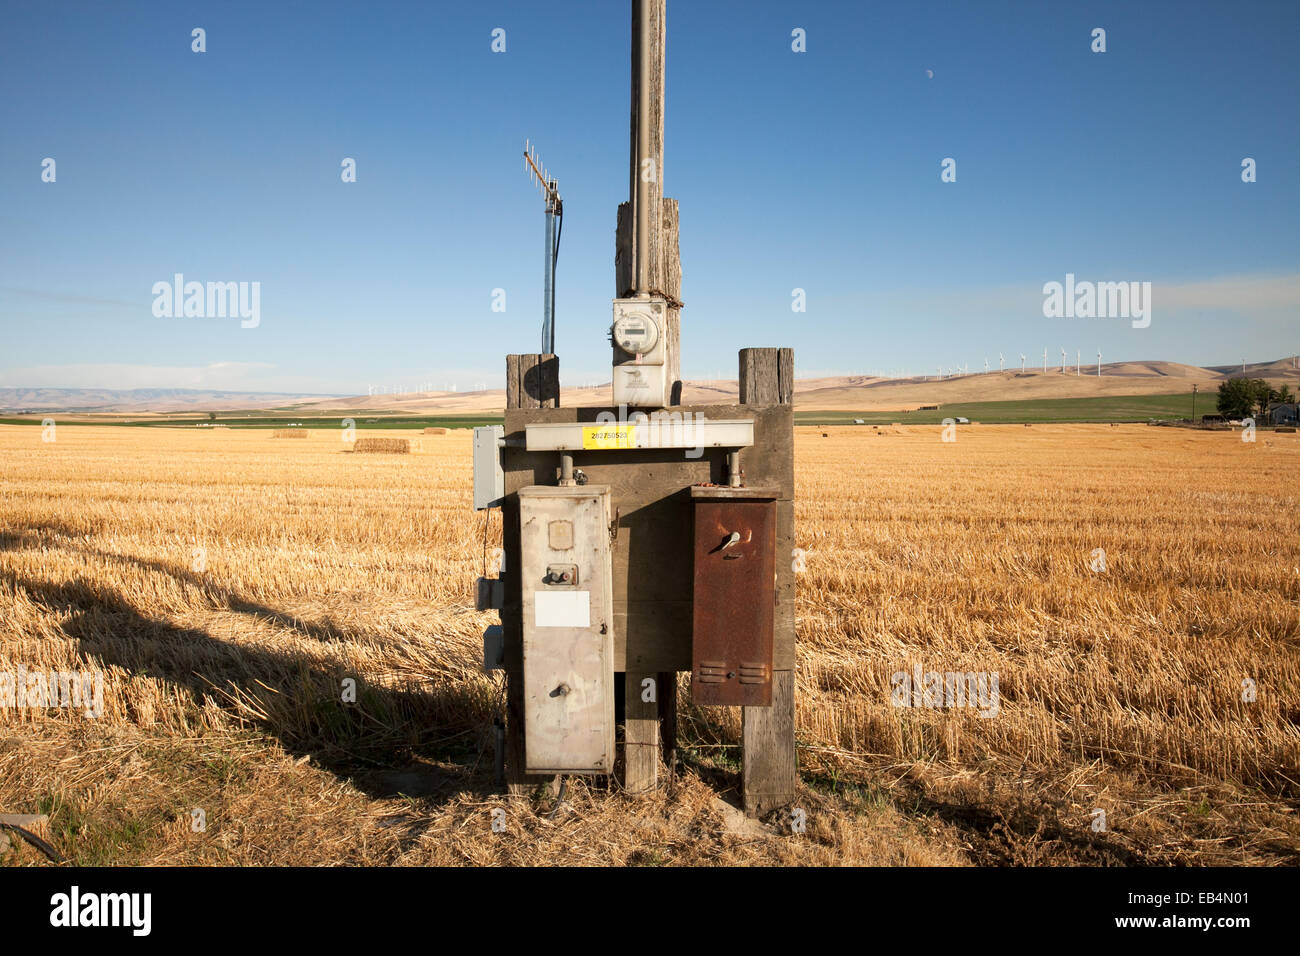 An electrical power meter and distribution panel box in the middle of a farm field near windmill turbines. Stock Photo